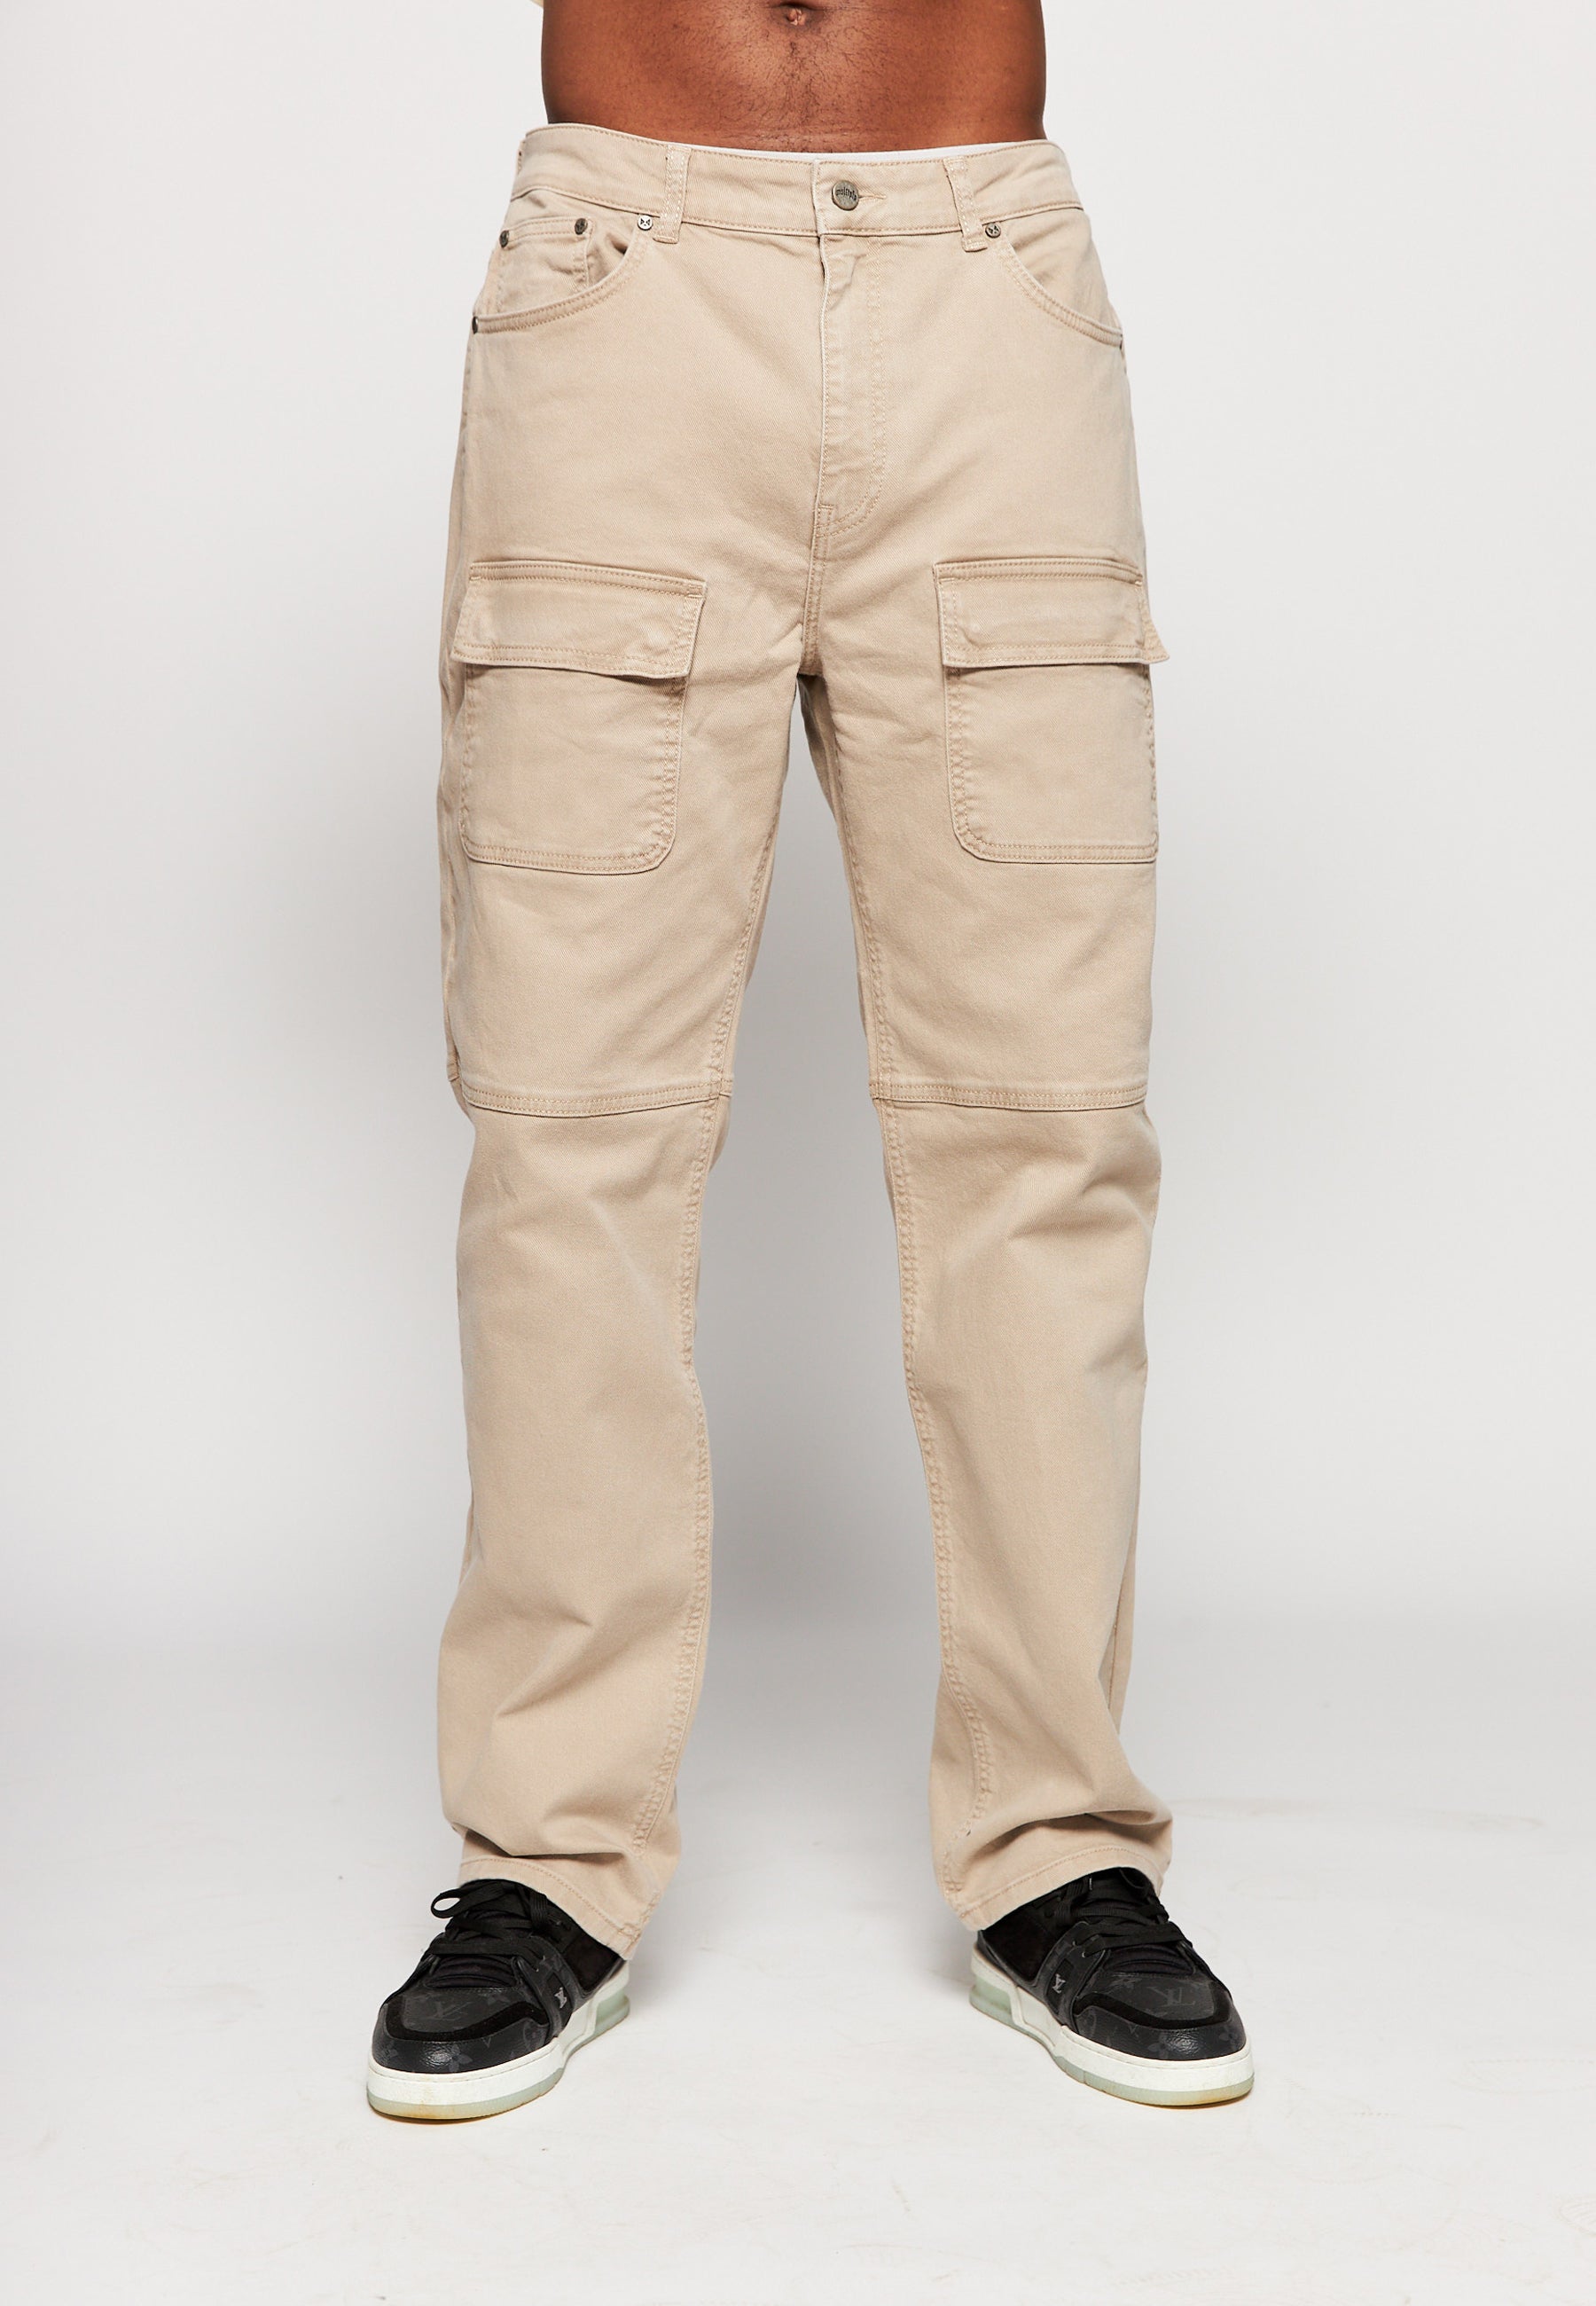 Multiply Denim FRONT POCKET Simply Taupe